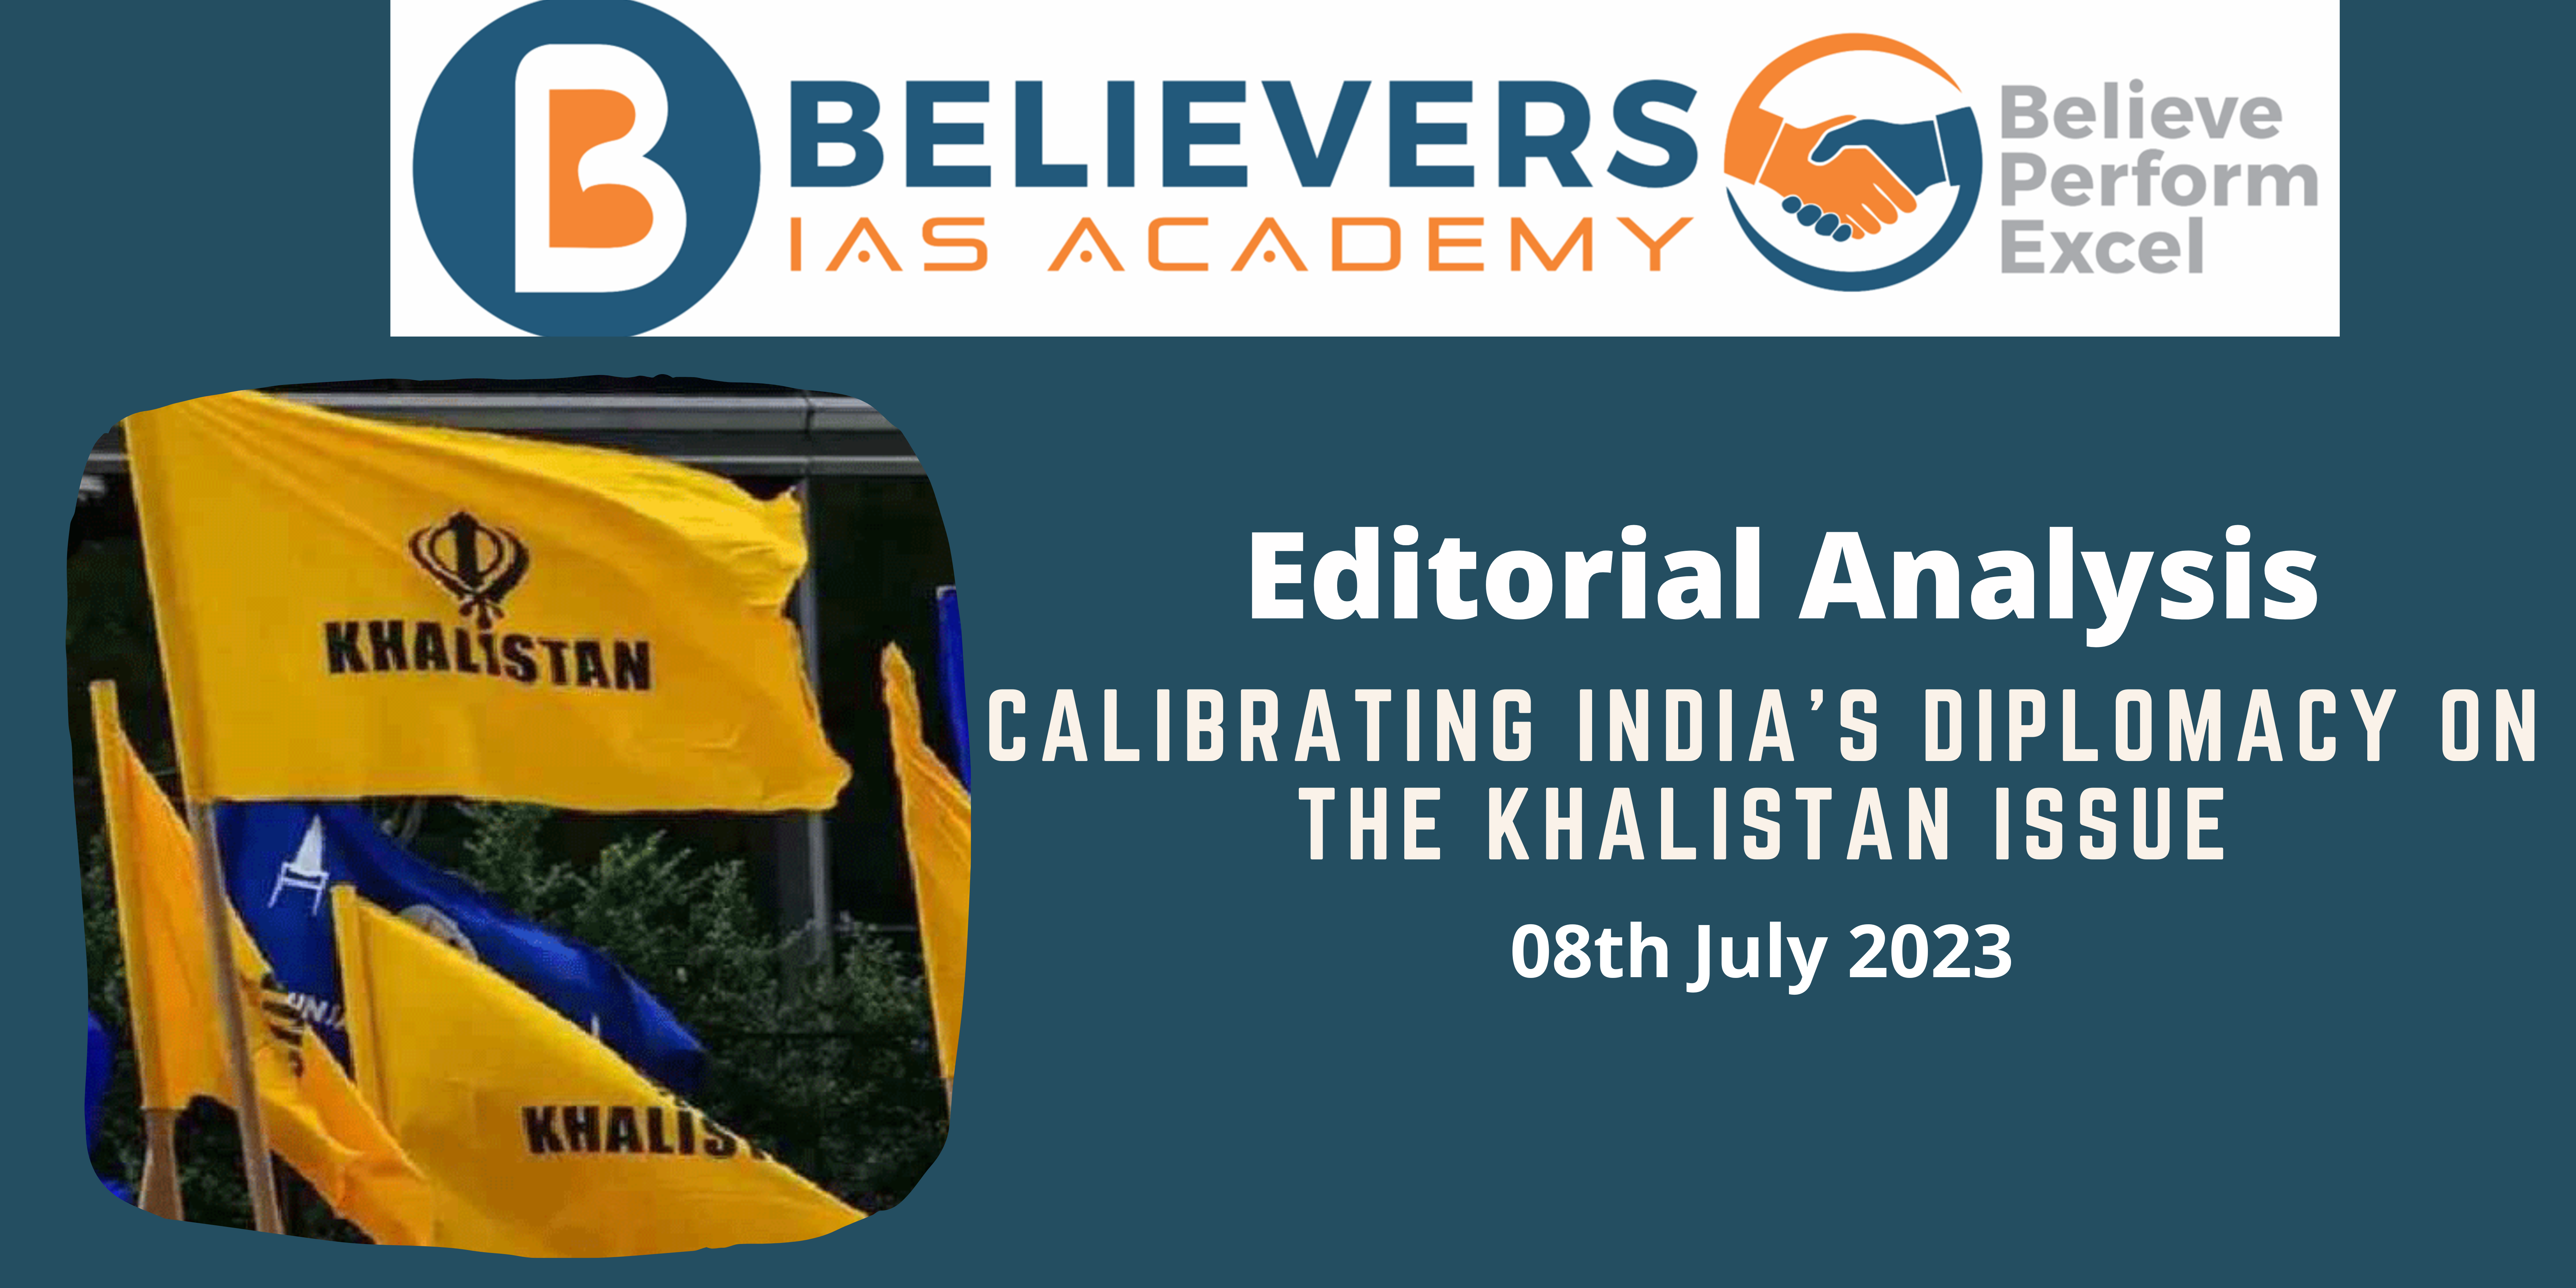 Calibrating India's Diplomacy on the Khalistan Issue